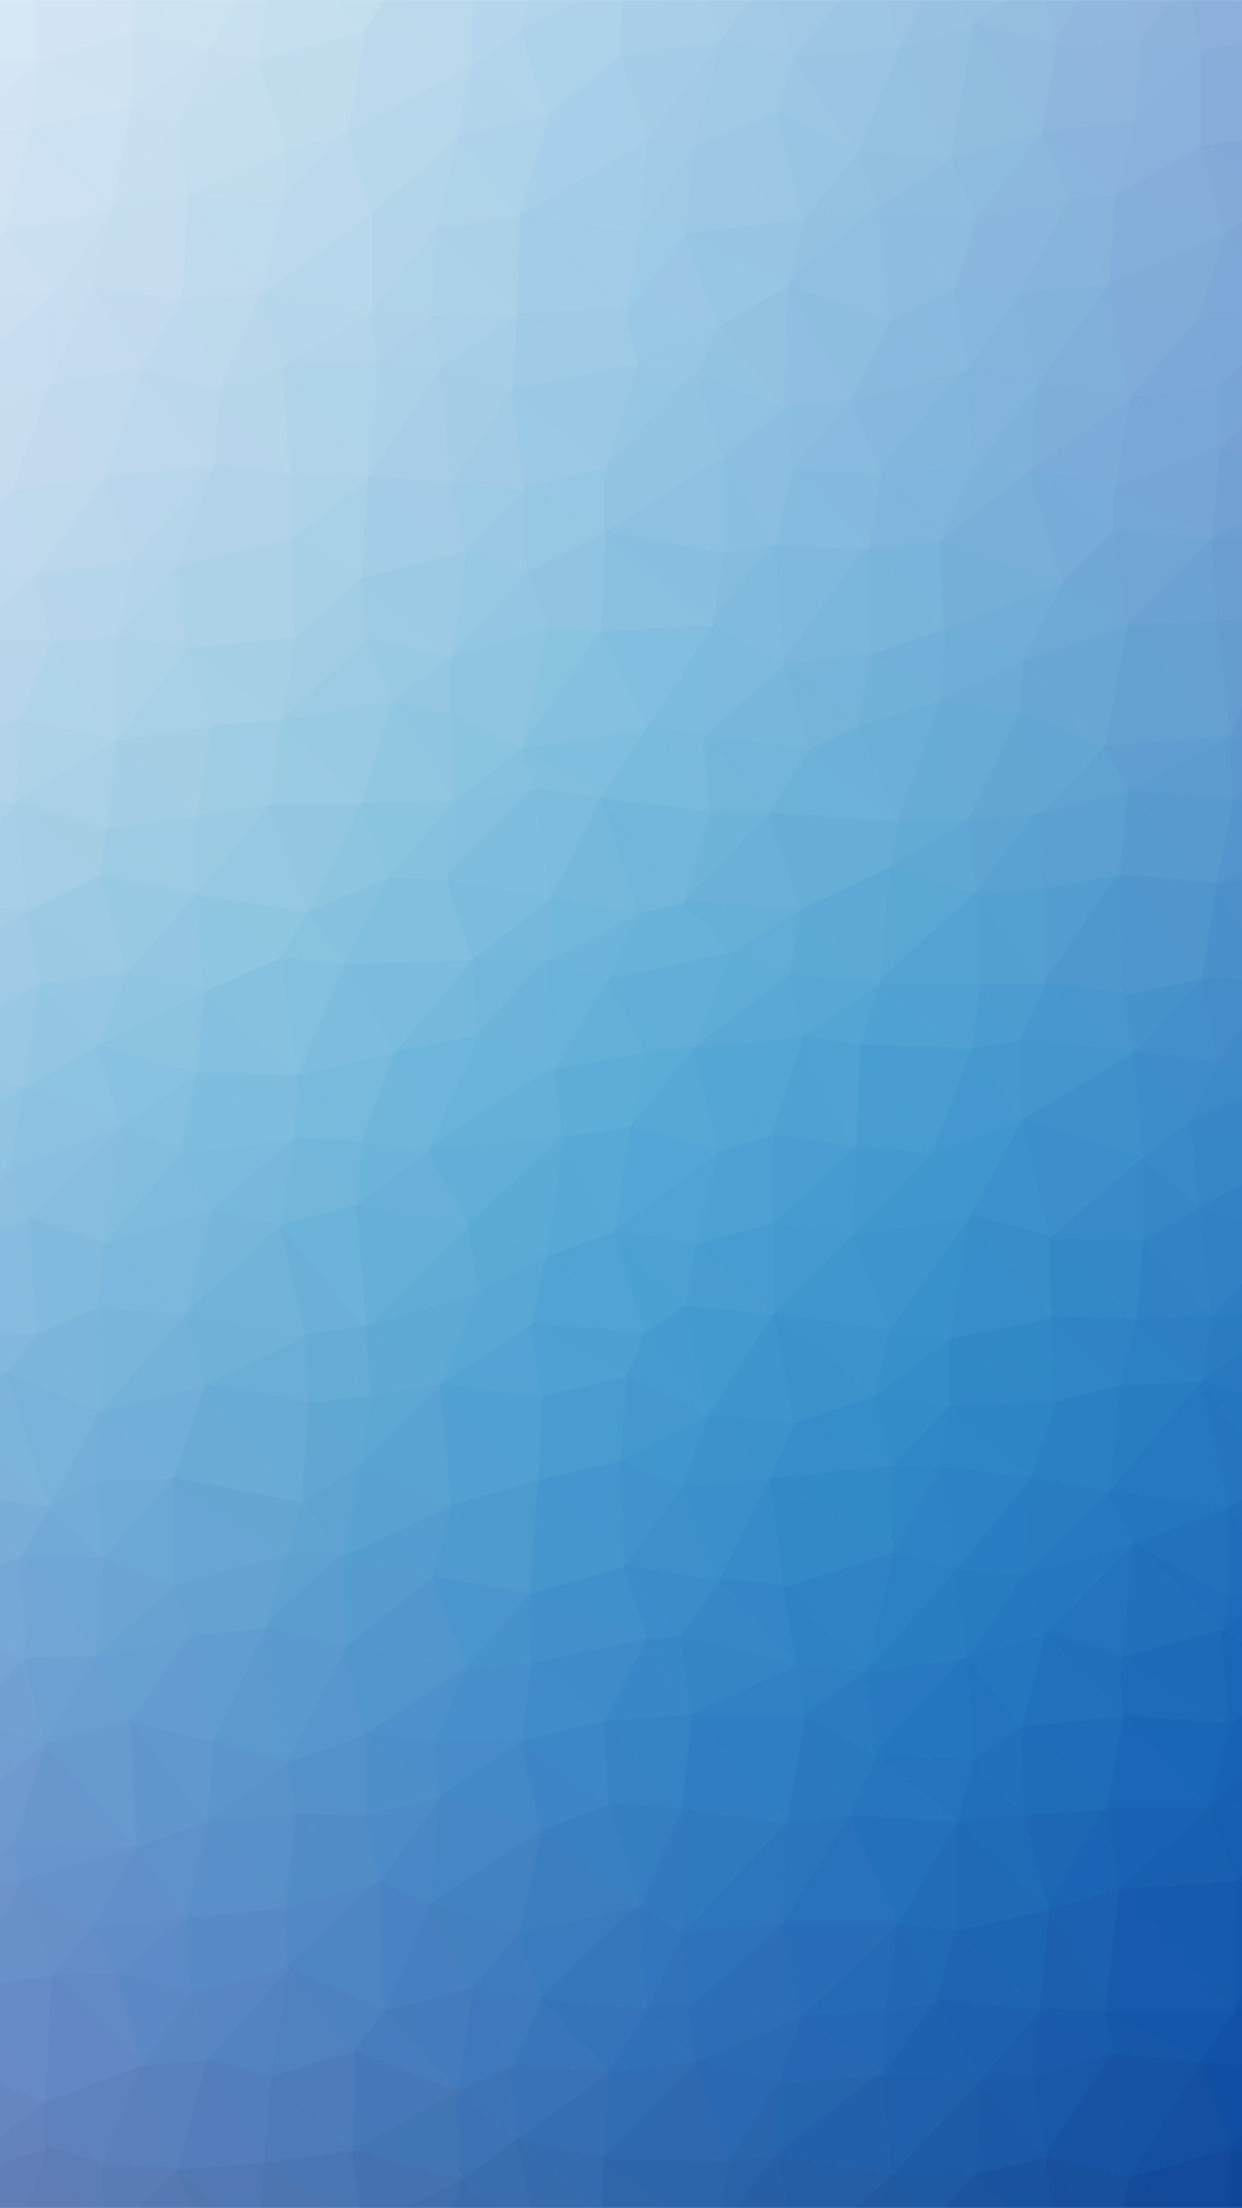 Polygon Art Blue Abstract Pattern Android wallpaper